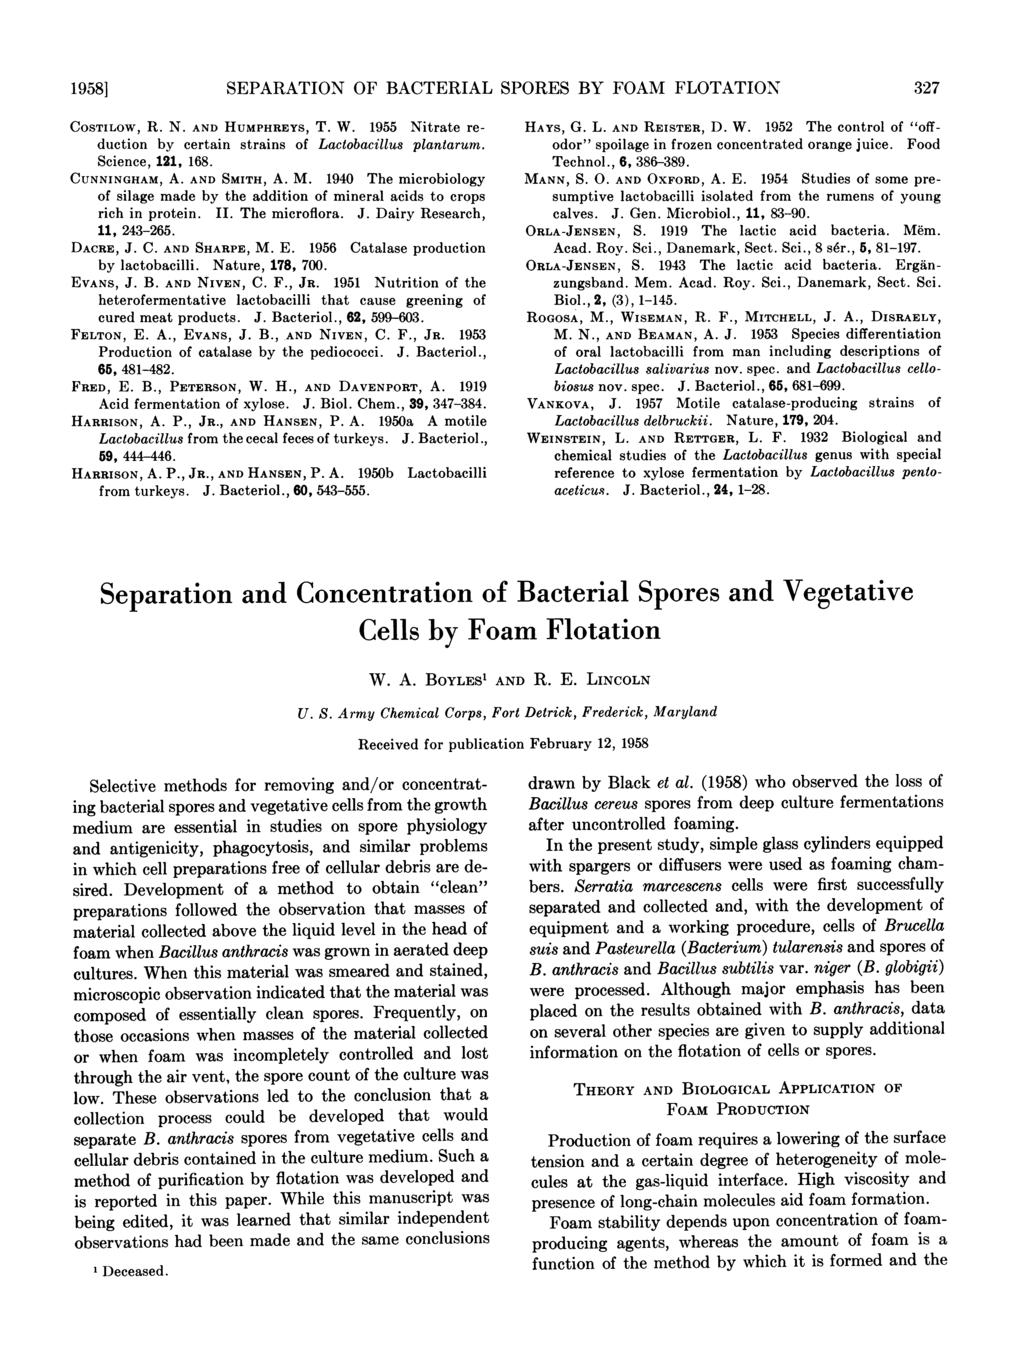 19581 SEPARATION OF BACTERIAL SPORES BY FOAM FLOTATION327 327 COSTILOW, R. N. AND HUMPHREYS, T. W. 1955 Nitrate reduction by certain strains of Lactobacillus plantarum. Science, 121, 168.